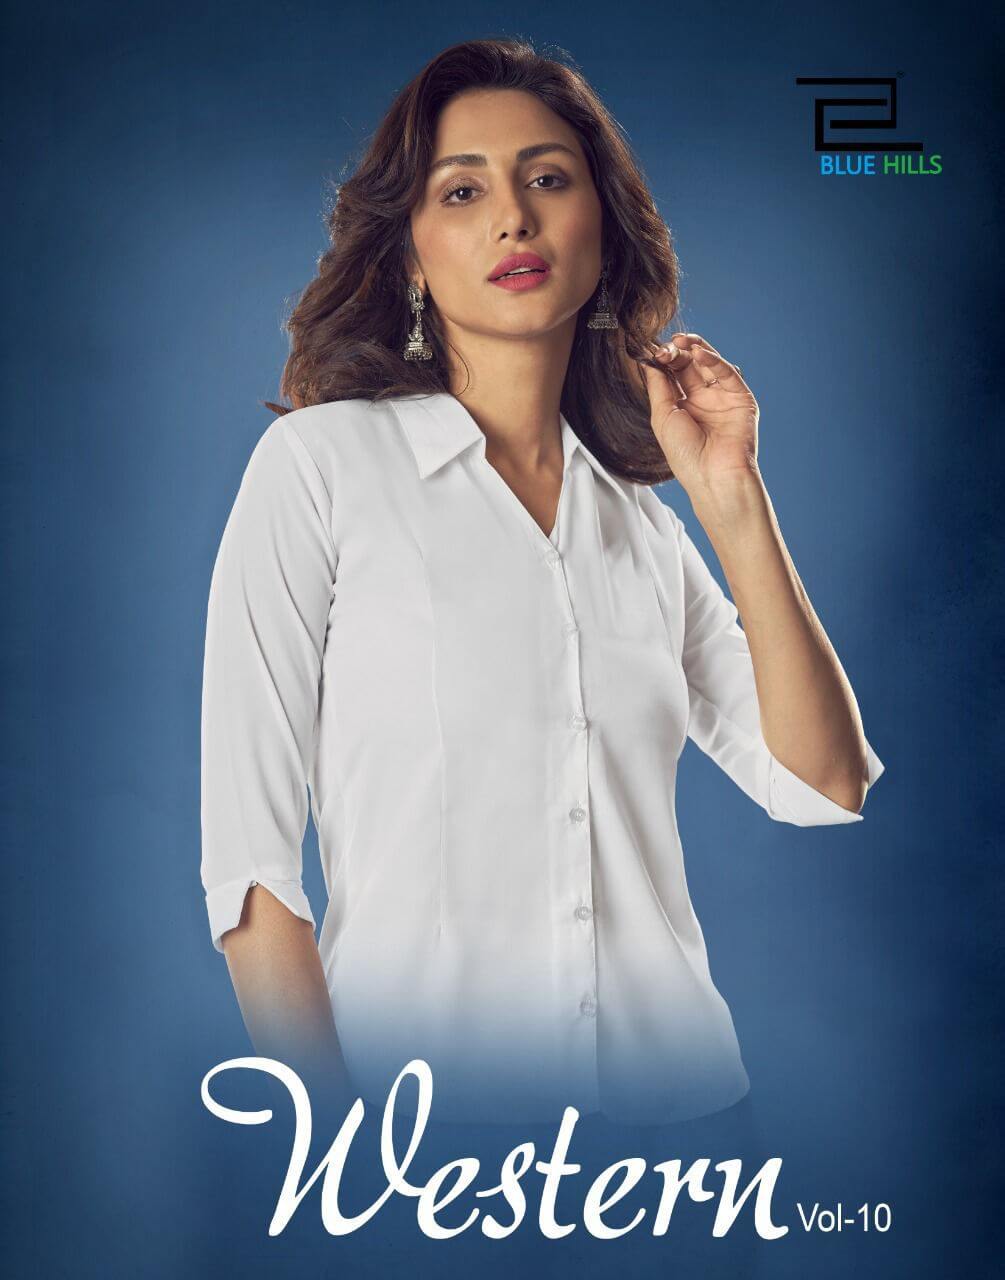 Blue Hills Western Vol 10 Fancy Top Catalog In Wholesale Price. Purchase Full Catalog of Blue Hills Western Vol 10 In Wholesale Price Online